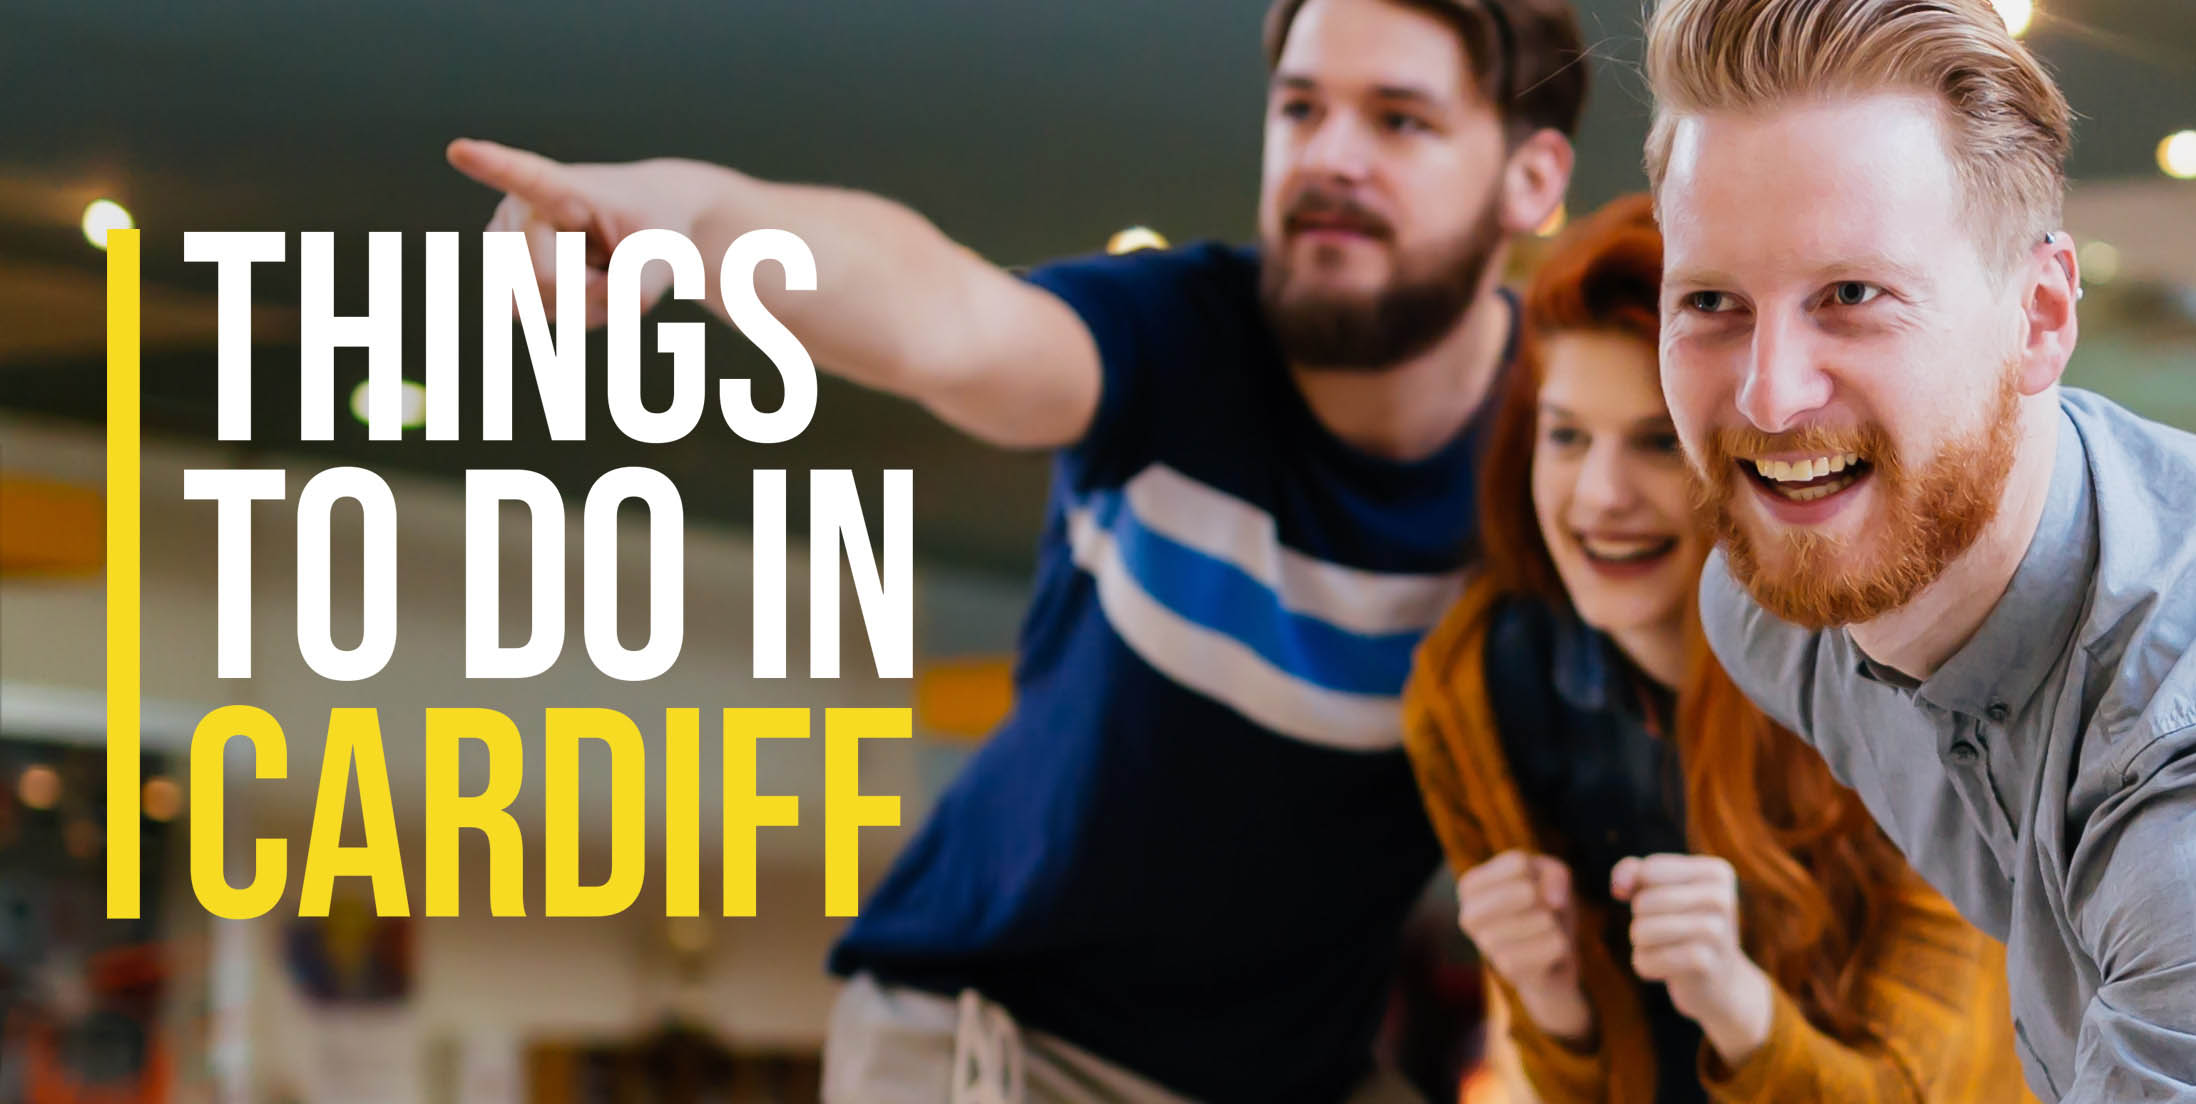 Things to Do in Cardiff